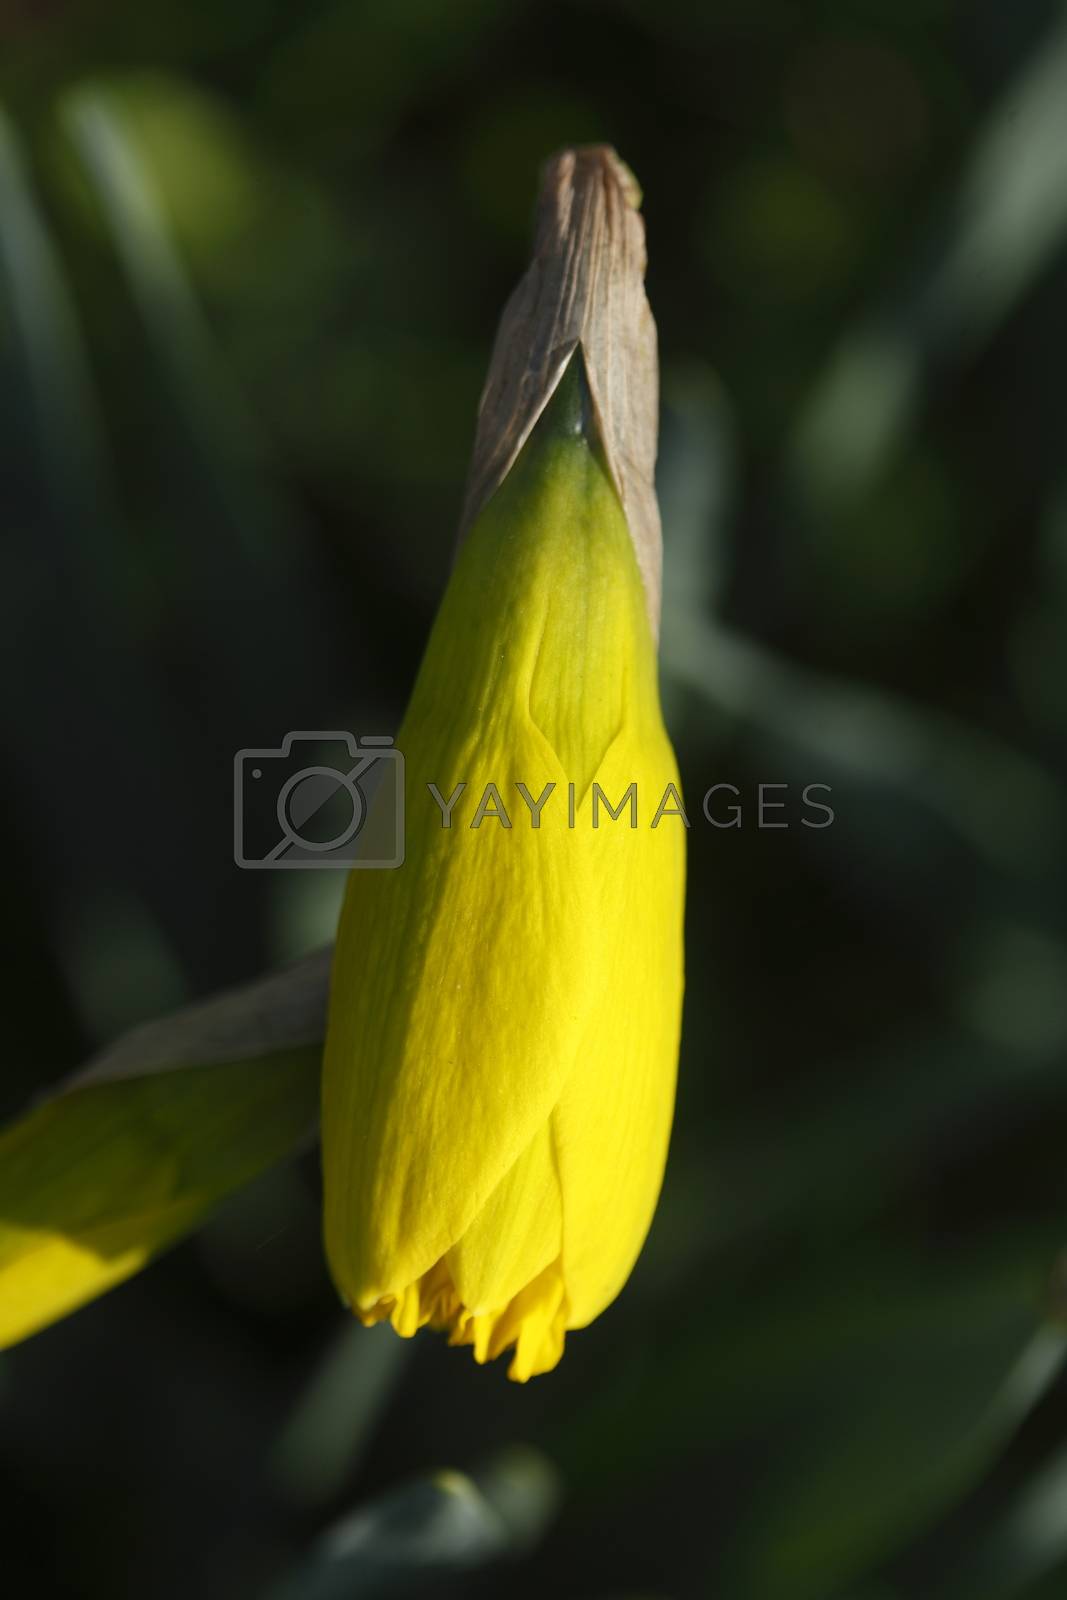 Royalty free image of Yellow Daffodil     by Detailfoto